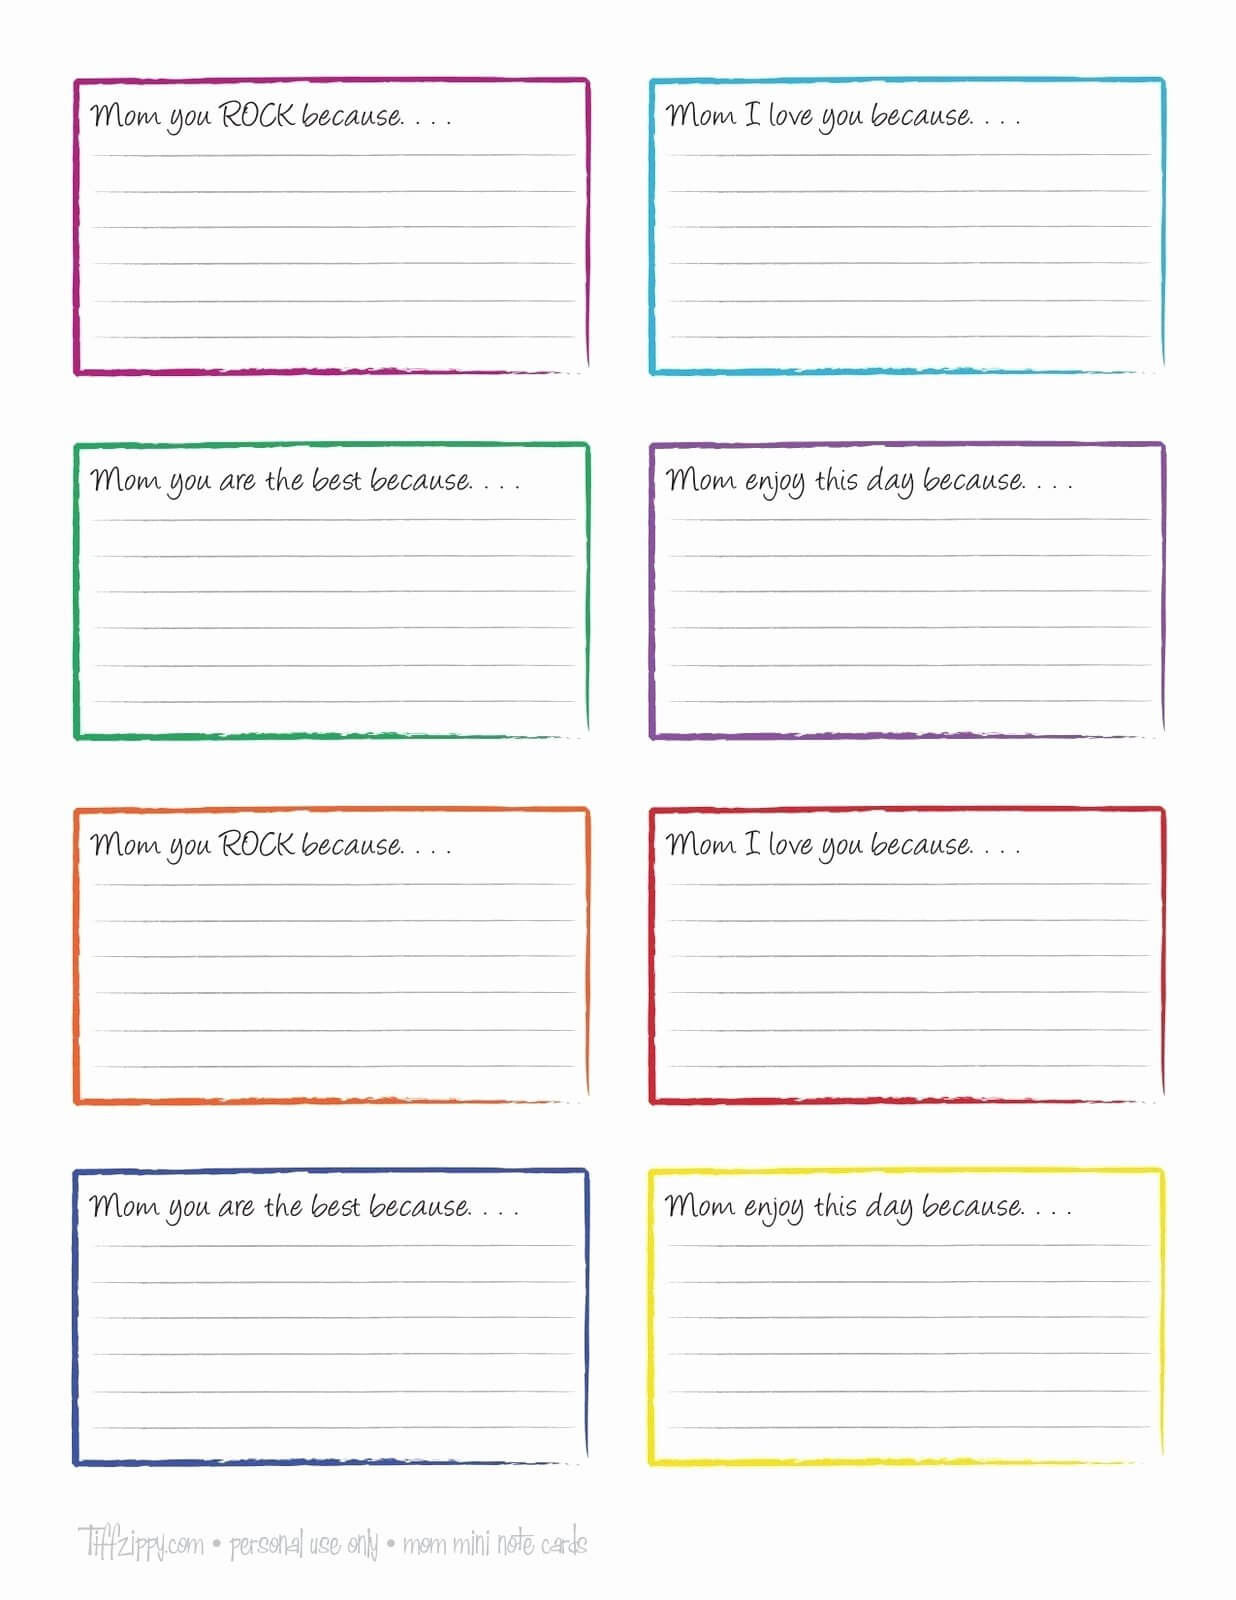 30 Note Card Template Google Docs | Pryncepality In Google Docs Index Card Template